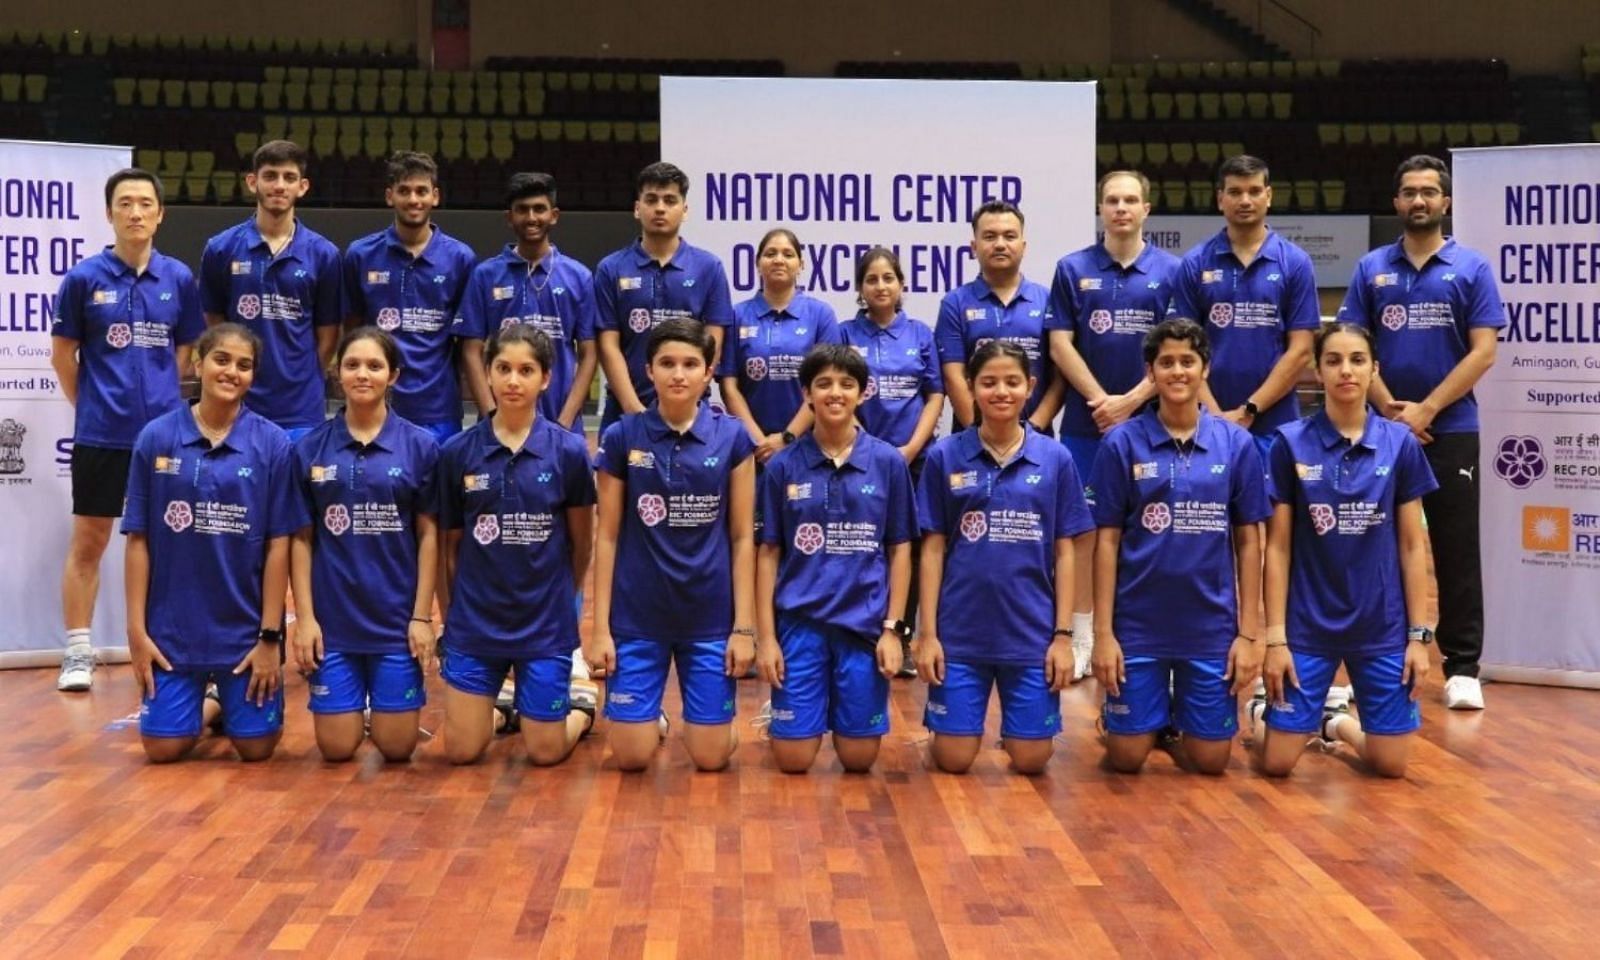 The Indian team for the championships, Image Courtesy- thebridge